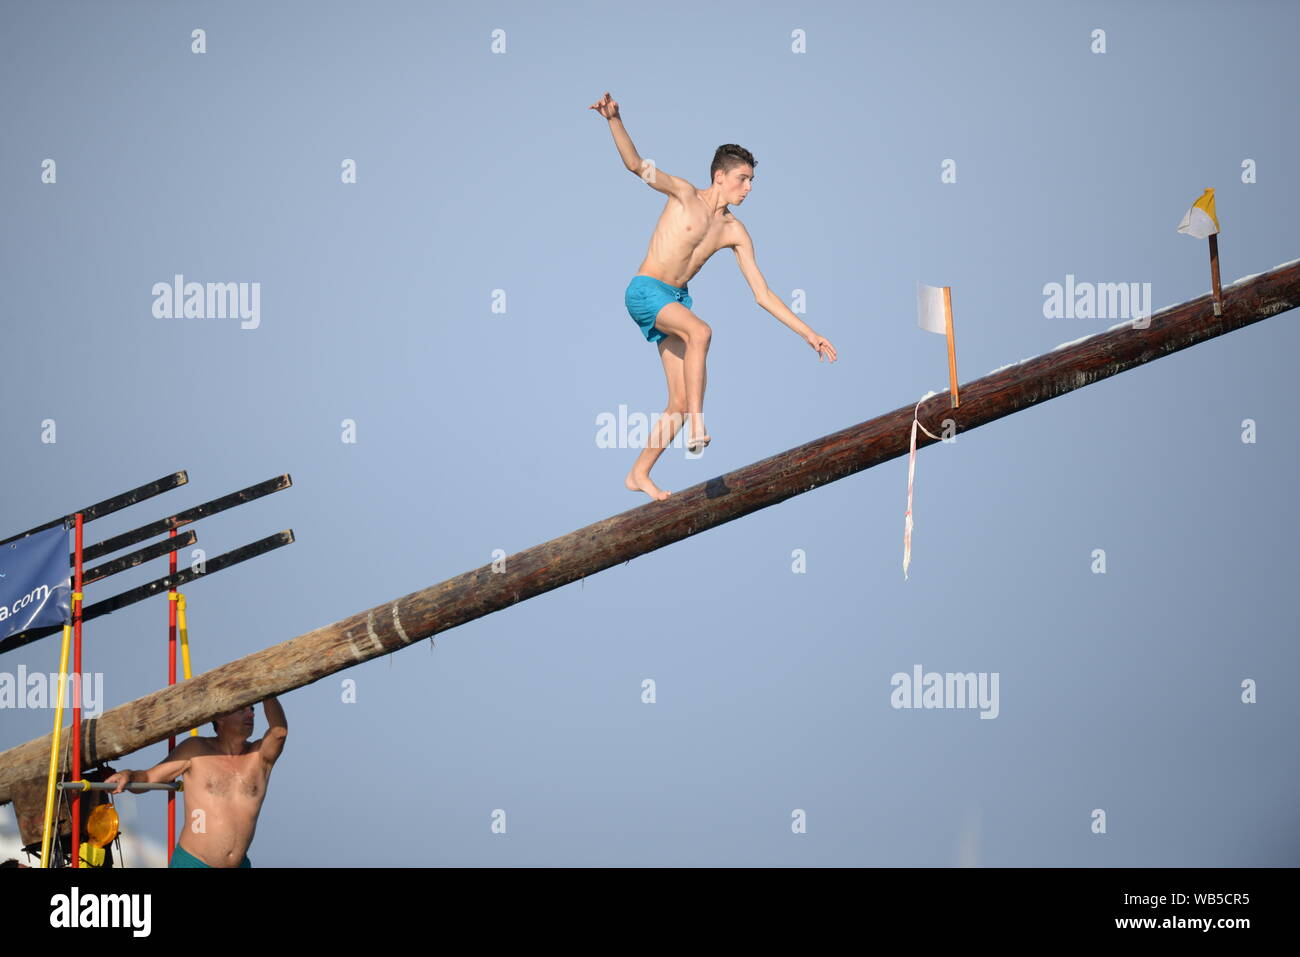 A participant during the greasy pole ('Ġostra' in Maltese) event at the village feast in St Julians, Malta Stock Photo